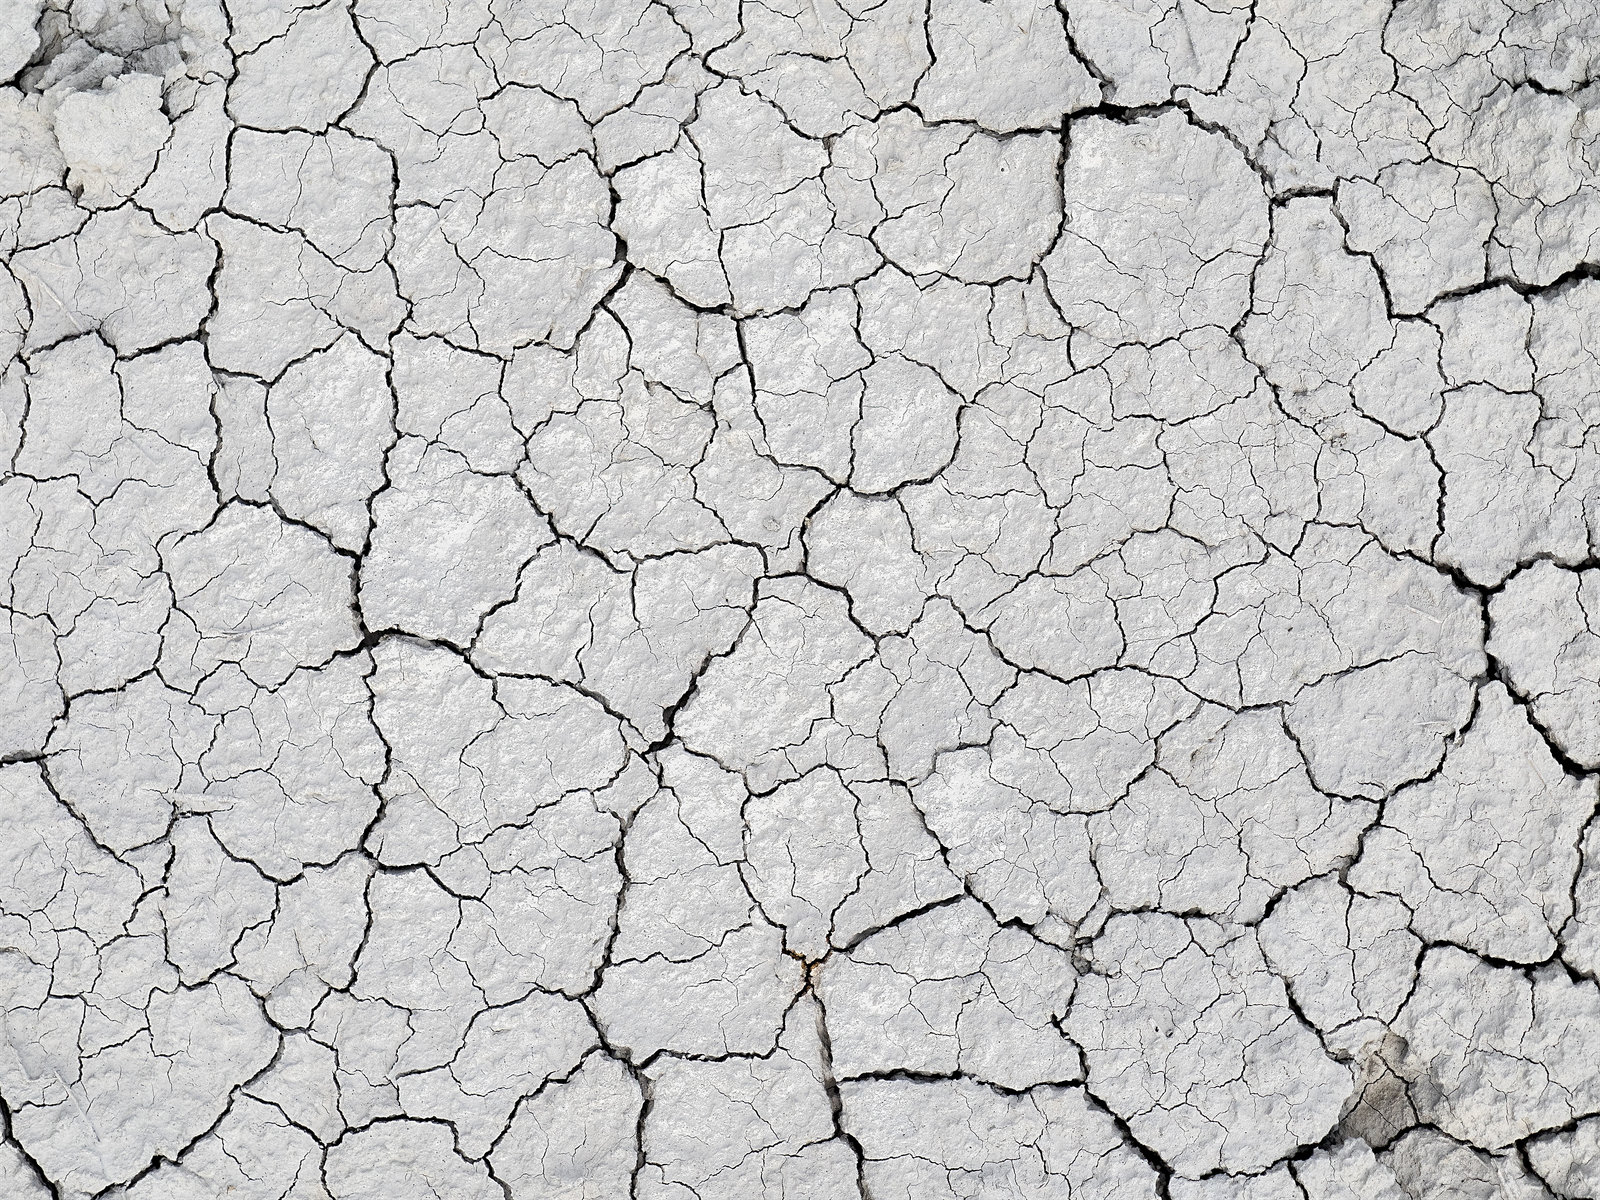 texture - mud cracks by 8moments on DeviantArt